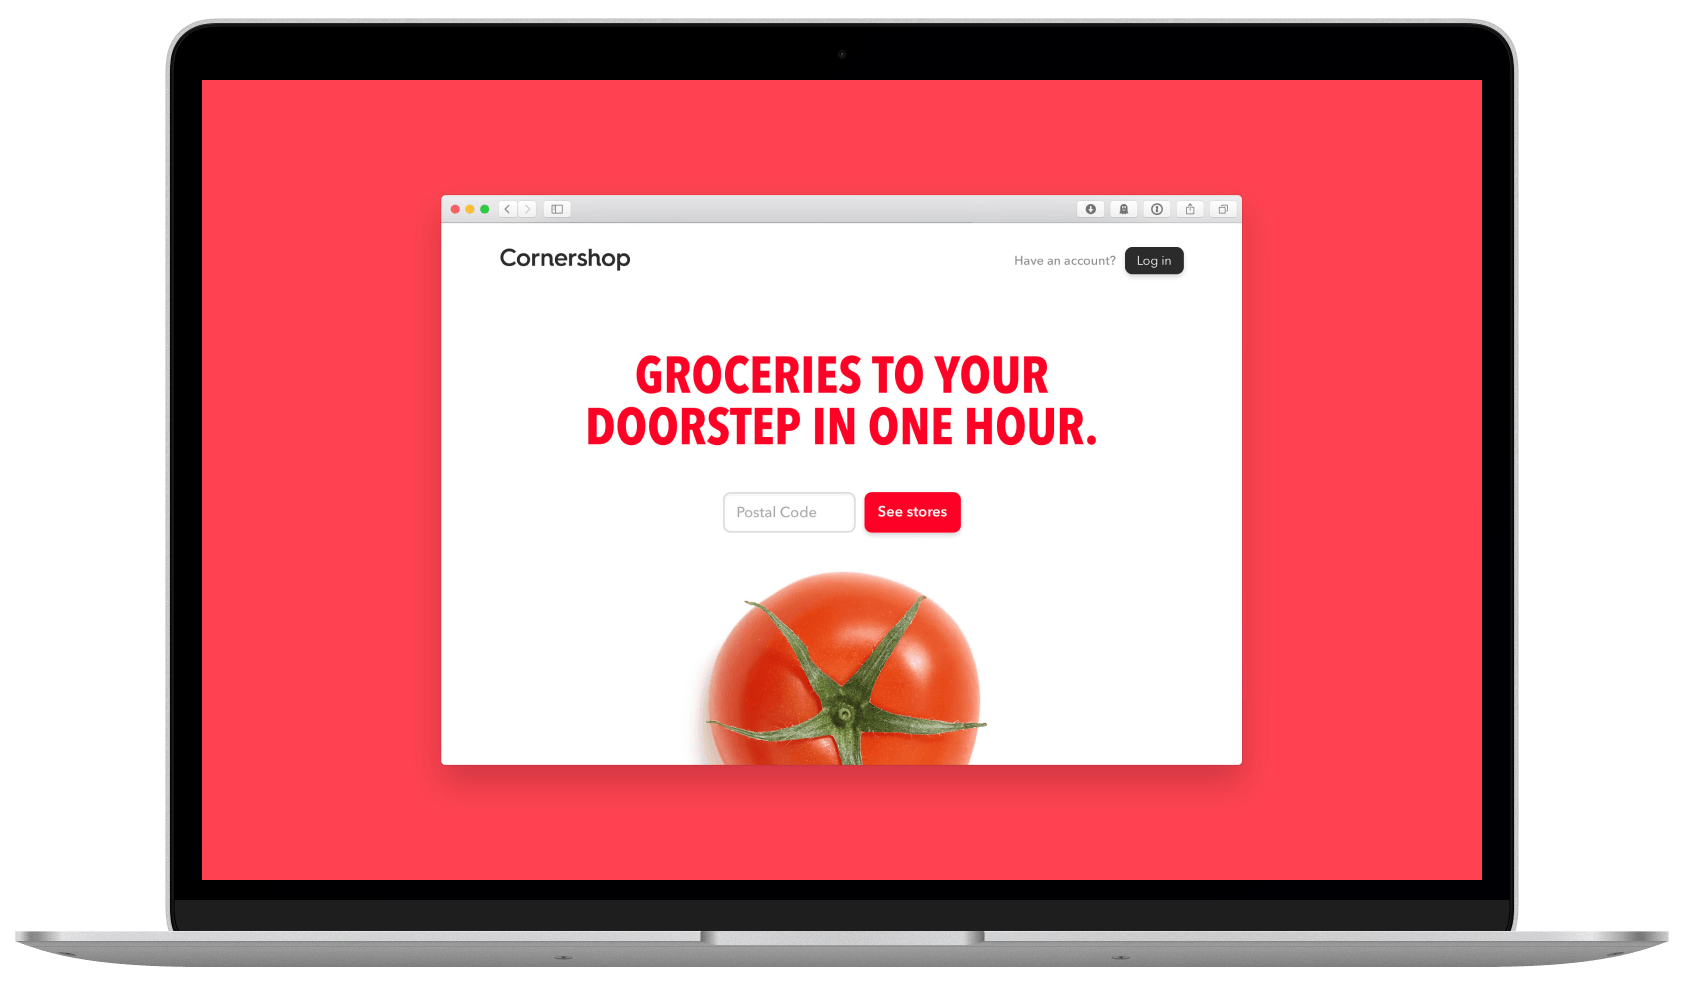 MacBook Air displaying a website with big and bold letters in red, typeset in Avenir Next, that reads “Groceries from your doorstep in one hour” on top of a giant tomato.